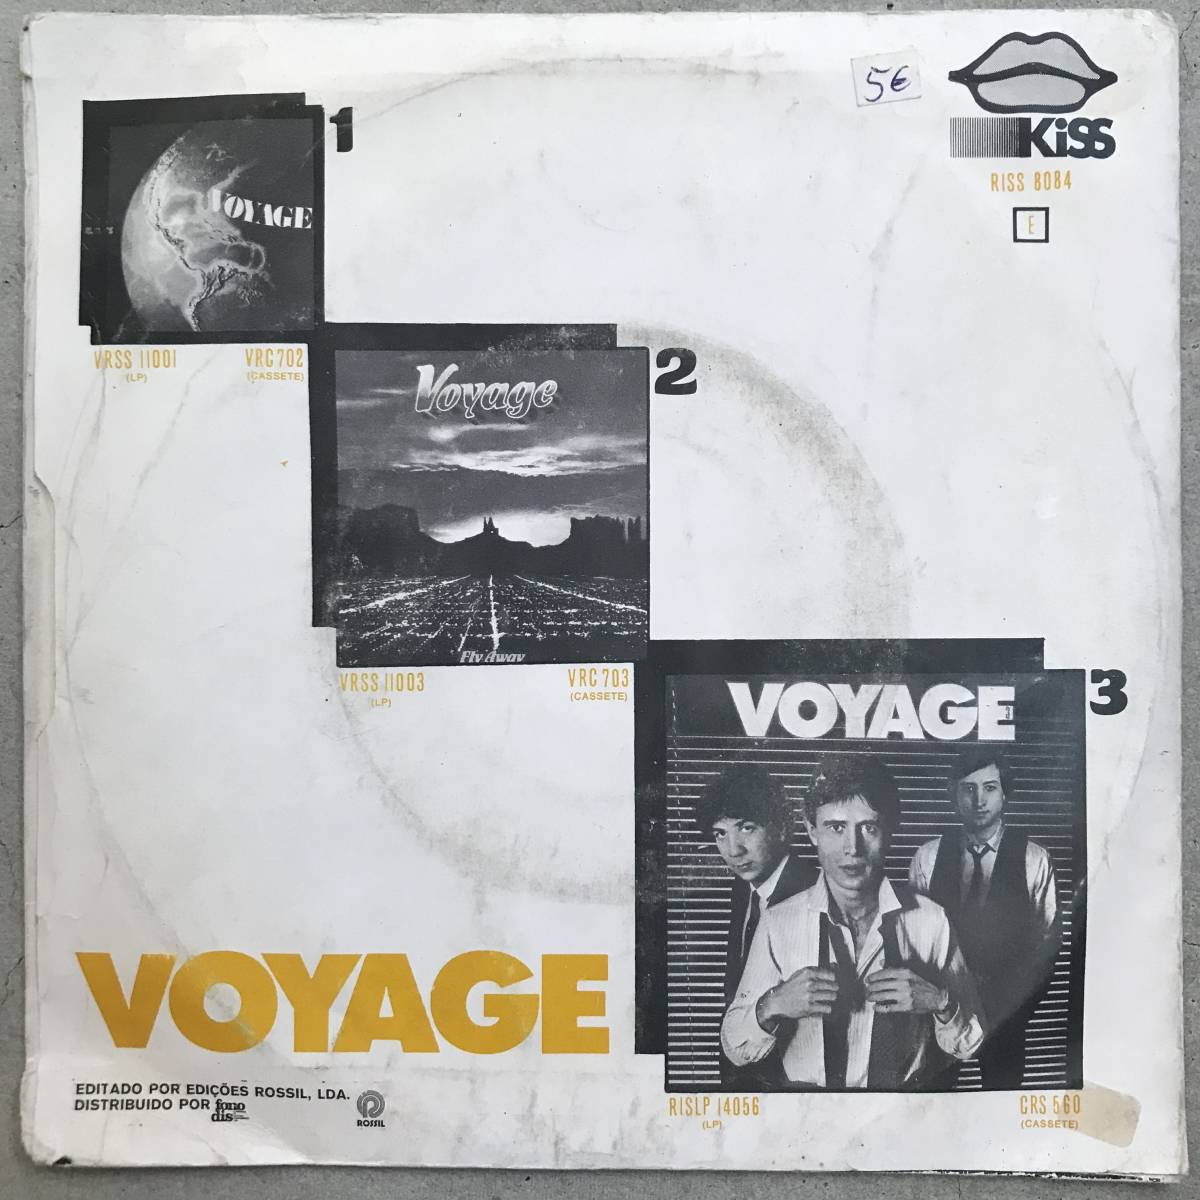 Voyage - I Don't Want To Fall In Love Again / I Love You Dancer / Larry Levan Danny Krivit DJ Harveyの画像2